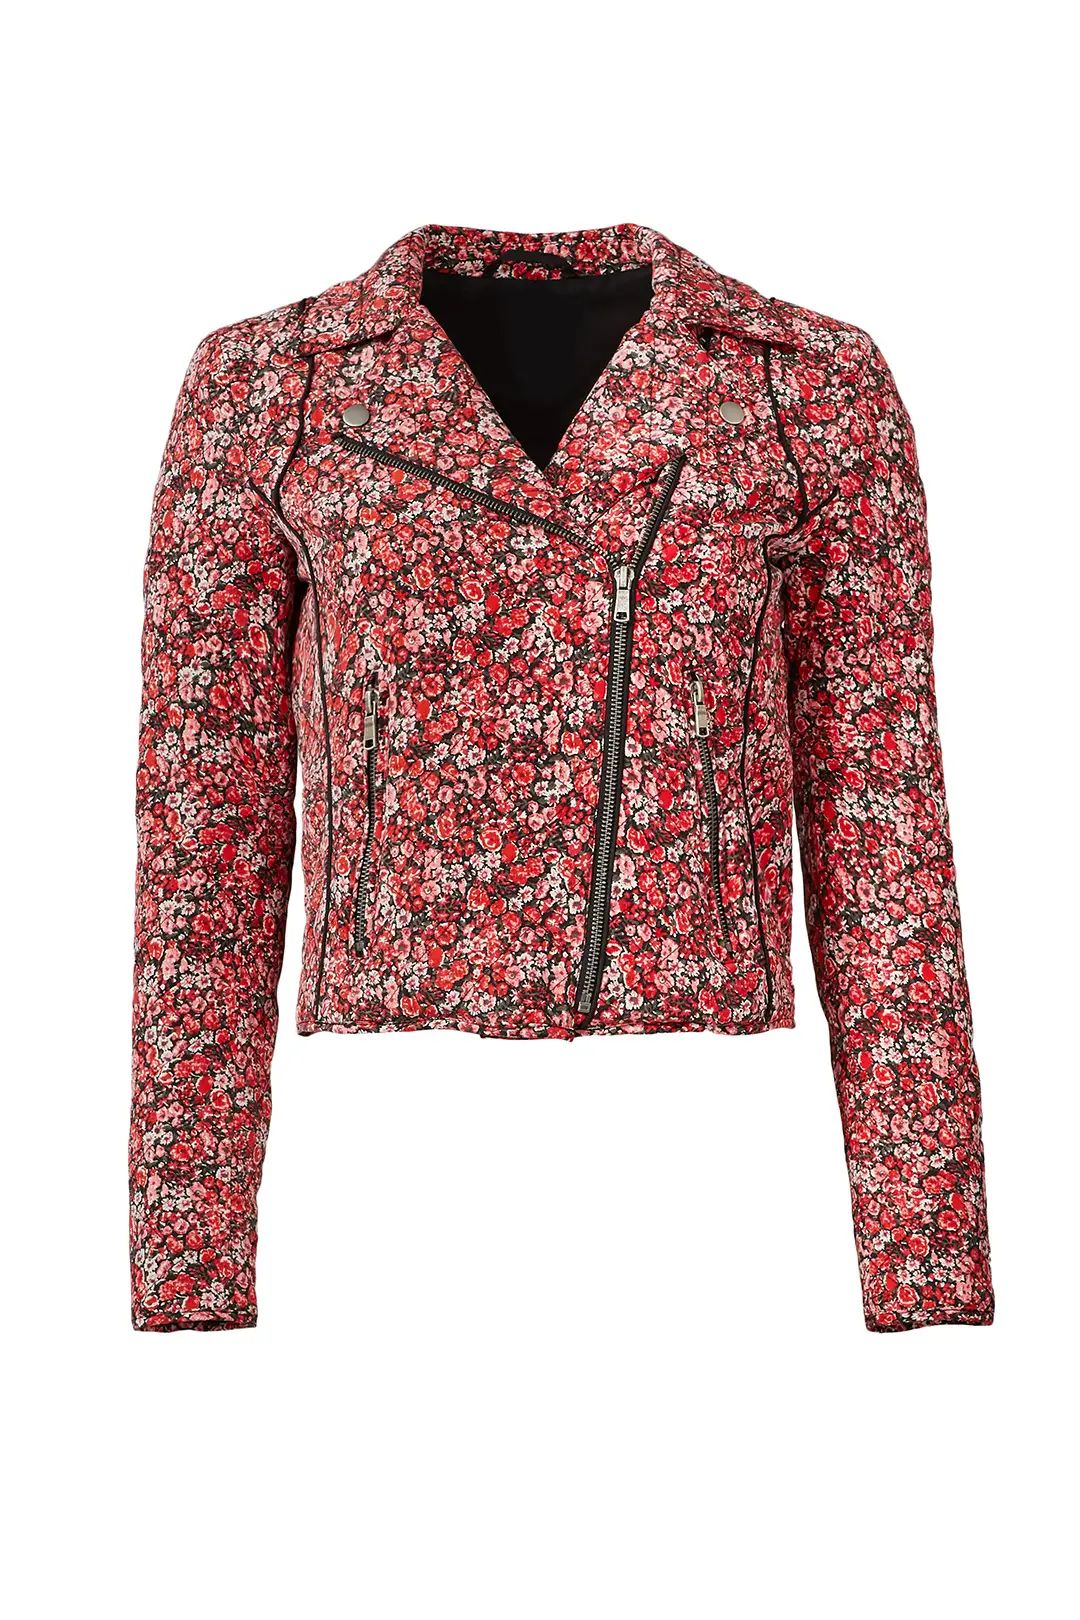 Joie Red Floral Frona Jacket | Rent The Runway